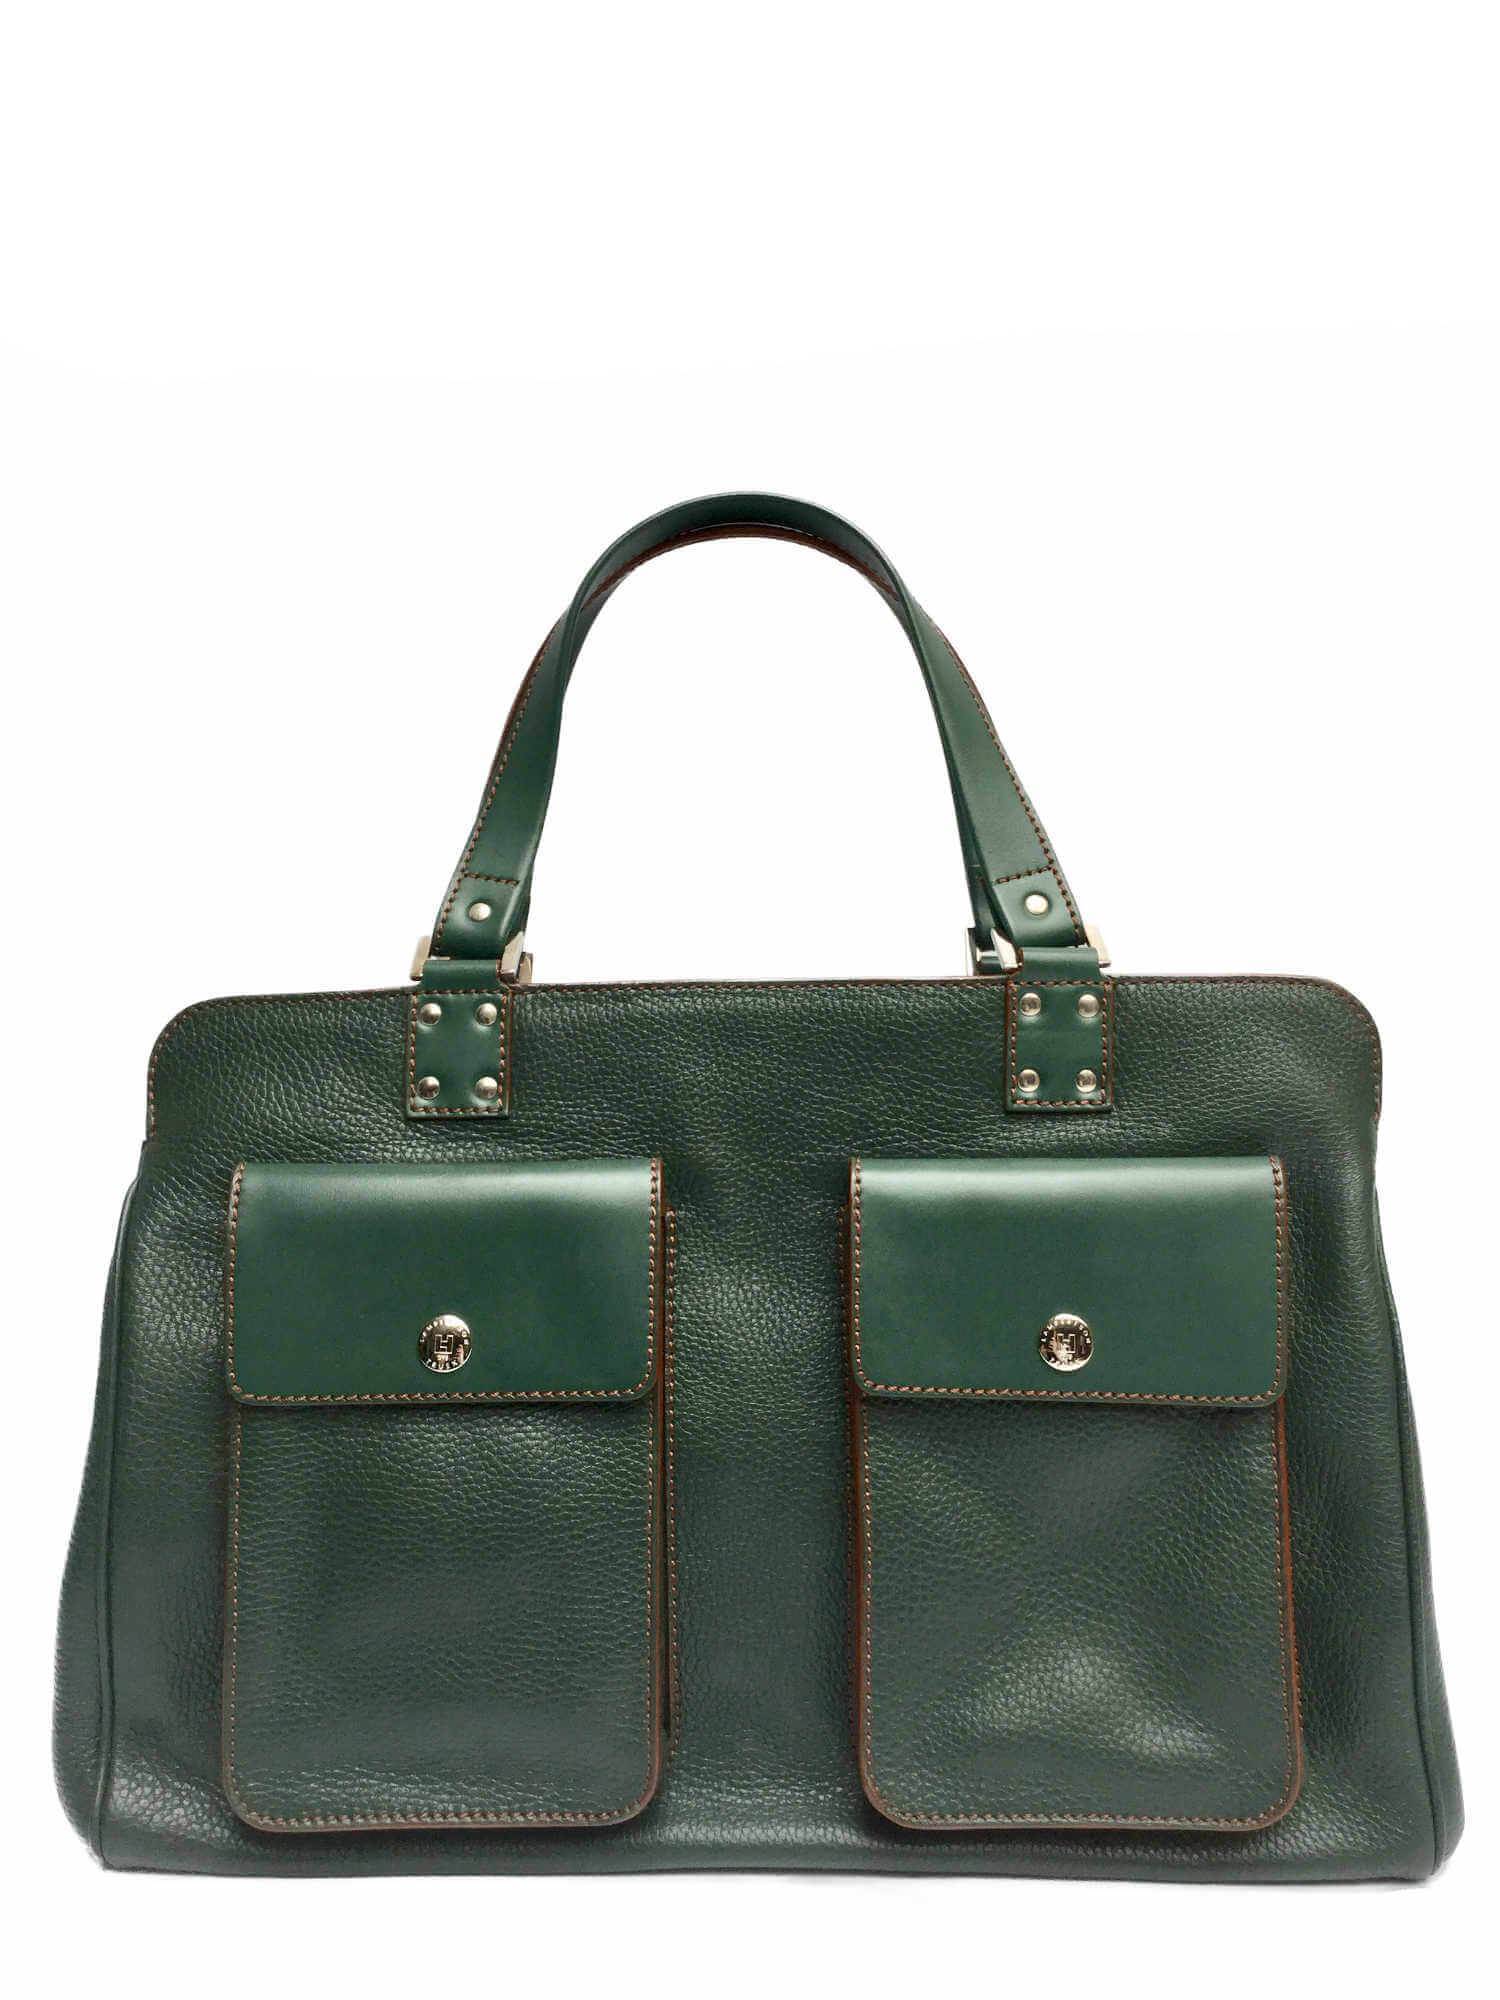 Lambertson Truex Structured Green Leather Tote Bag with Front Pockets-designer resale